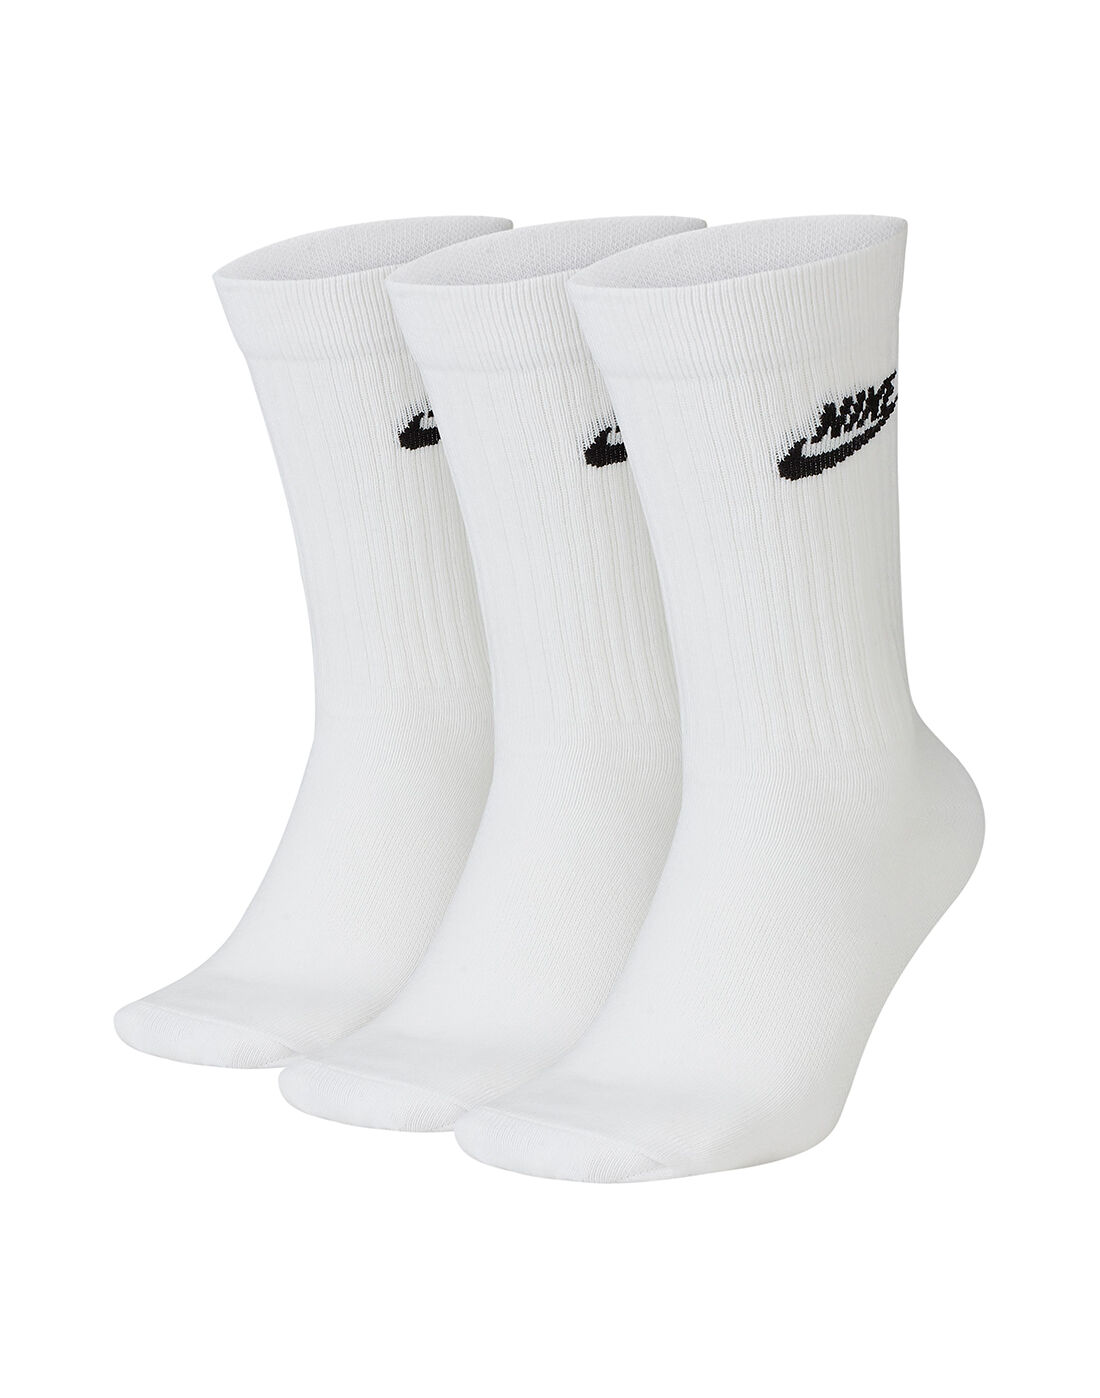 what stores sell nike socks